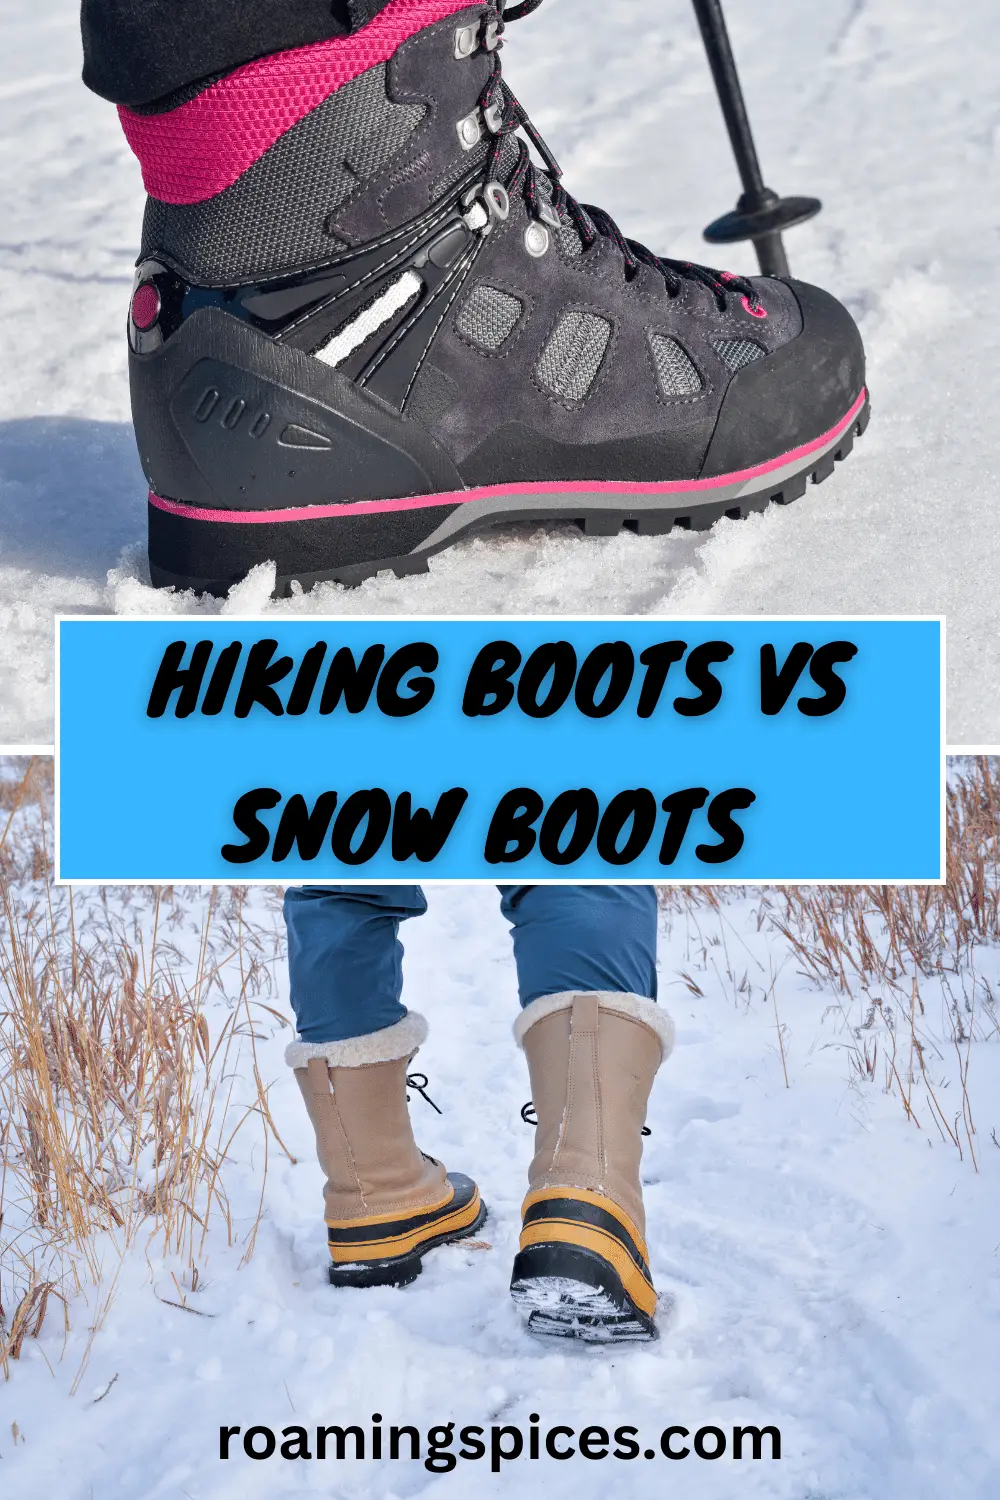 Hiking Boots vs Snow Boots